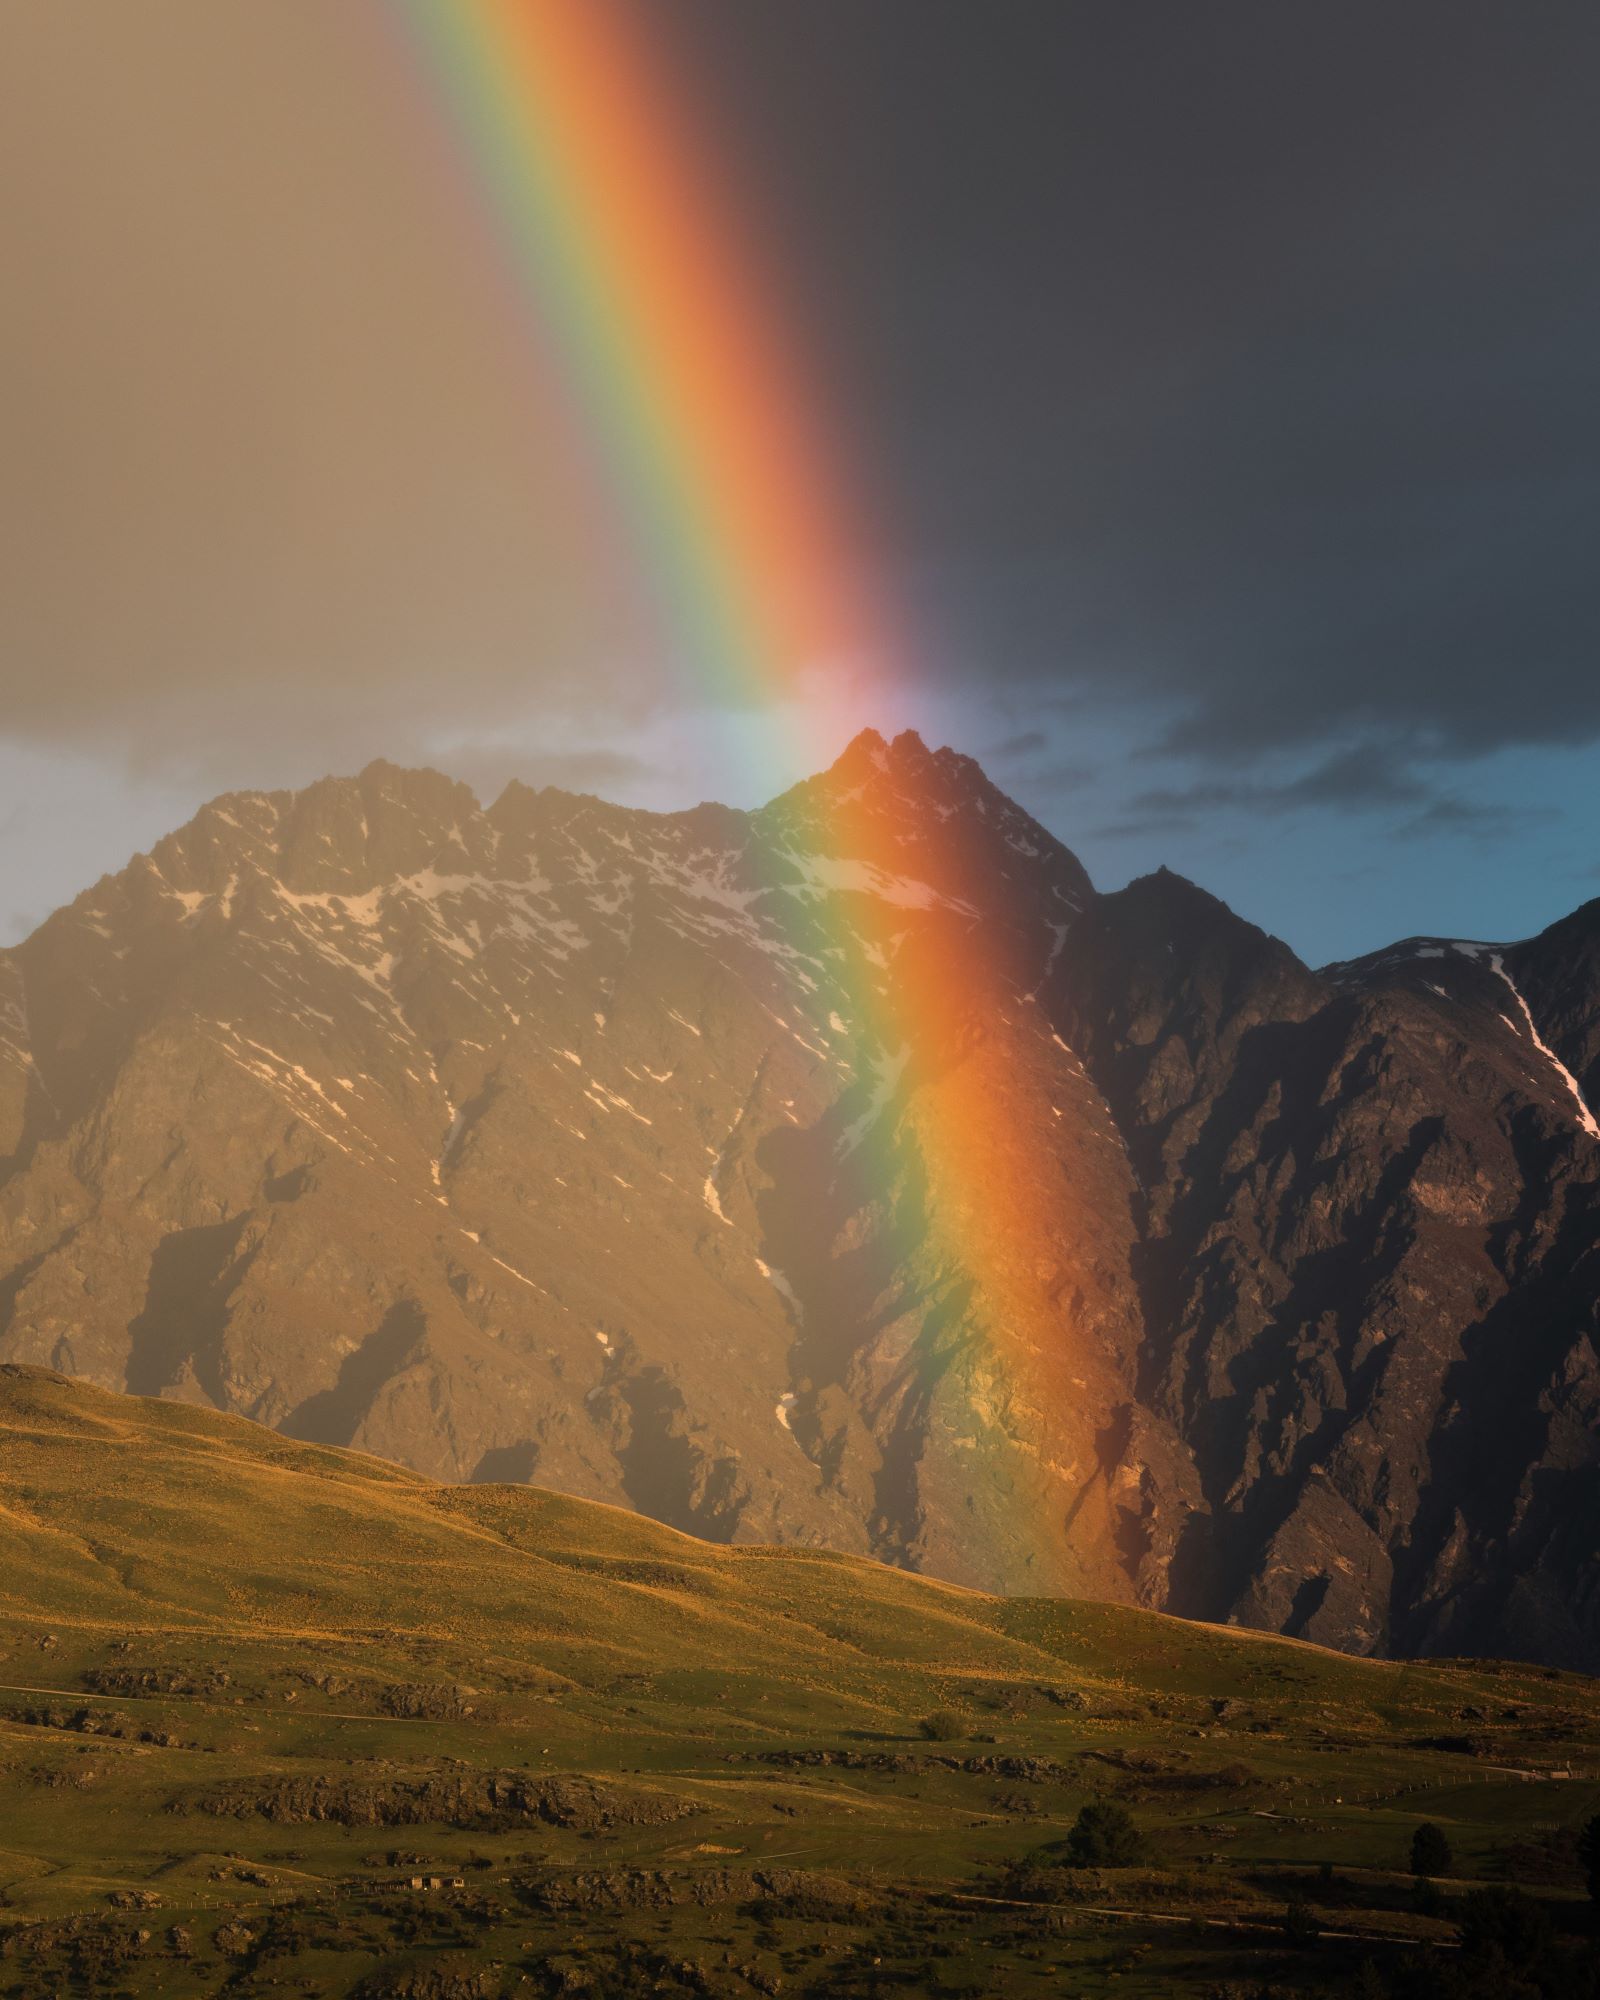 A rainbow shines in front of The Remarkables mountain range in Queenstown